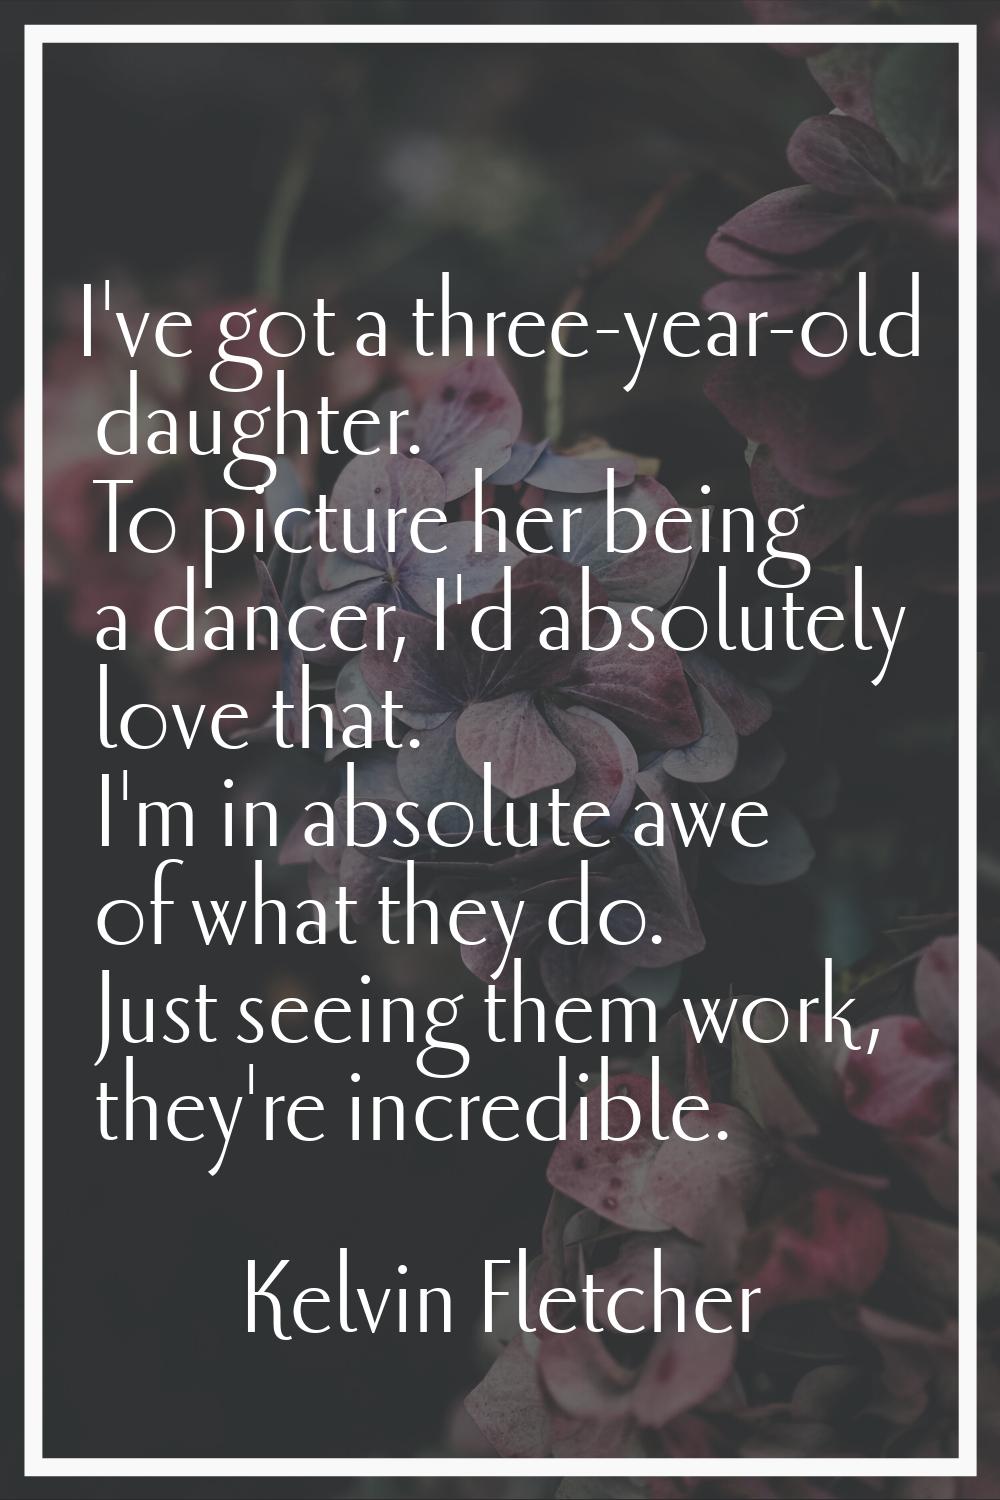 I've got a three-year-old daughter. To picture her being a dancer, I'd absolutely love that. I'm in